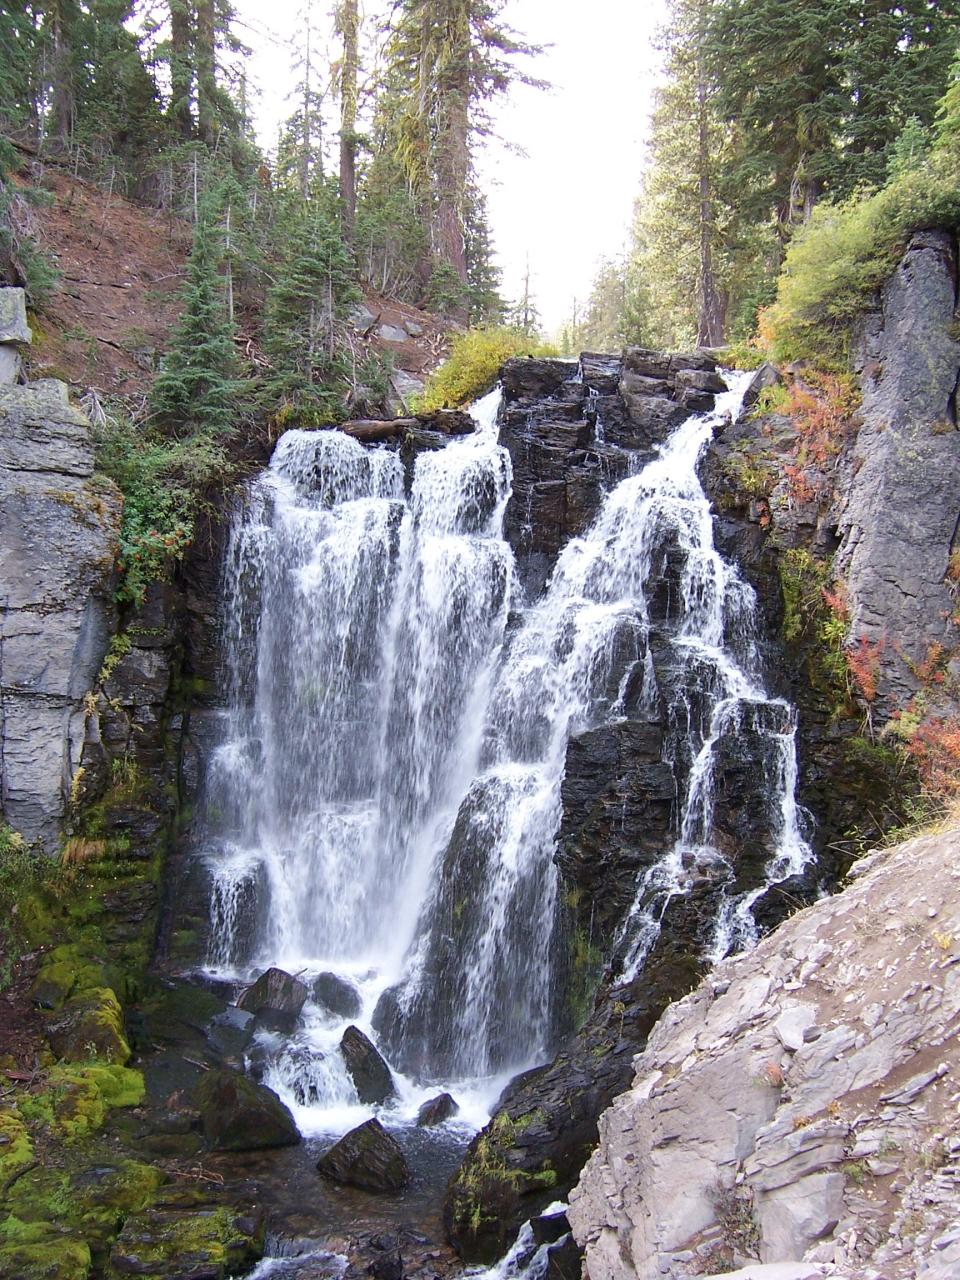 The hike to Kings Creek Falls in Lassen Volcanic National Park is a 2.3 mile loop to and from the 30-foot waterfalls.